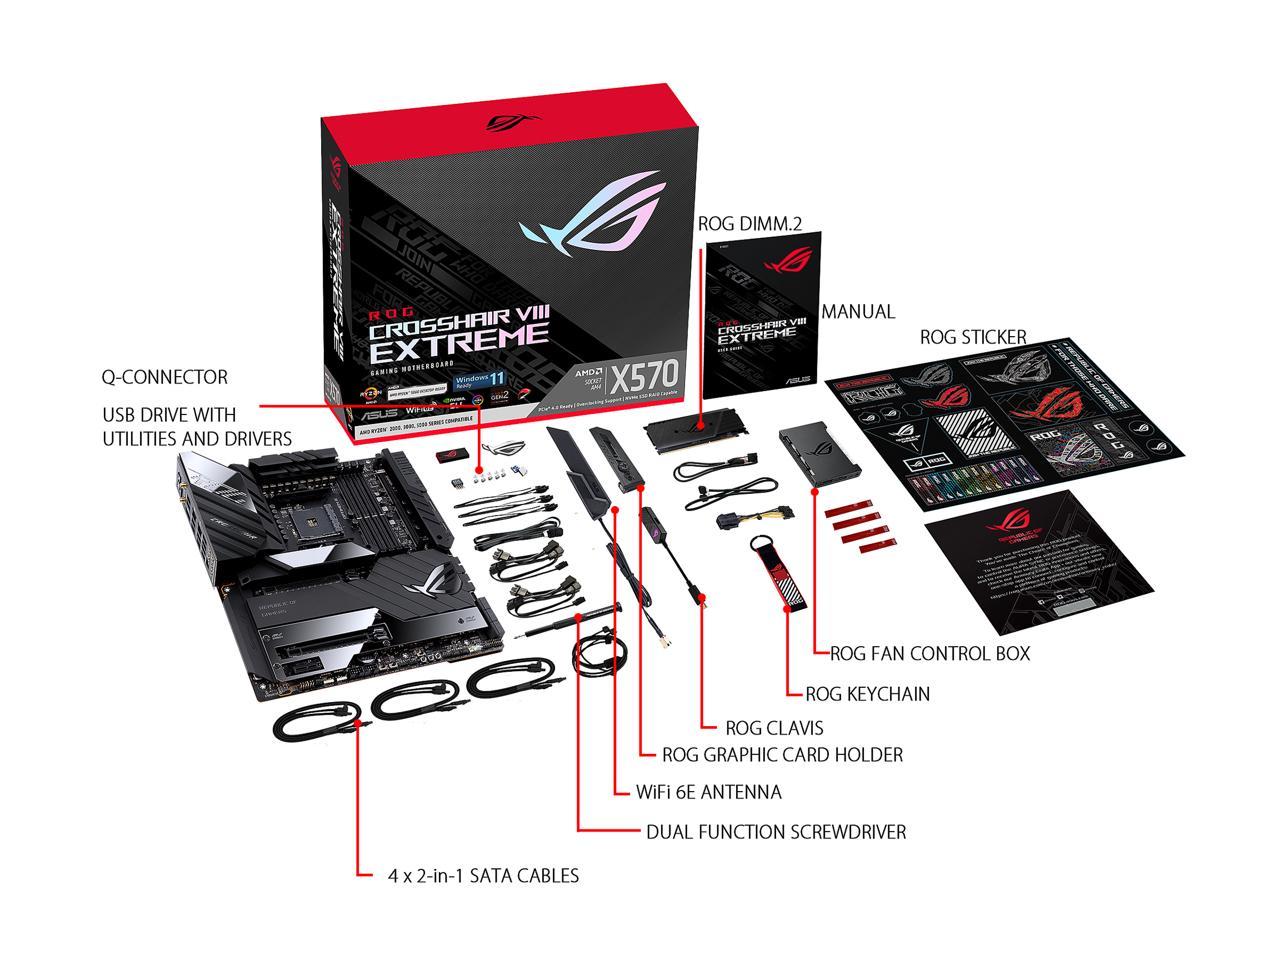 ASUS ROG Crosshair VIII Extreme AMD AM4 X570S EATX Gaming Motherboard (PCIe  4.0, Passive PCH Heatsink, 18+2 Power Stages, 5 x M.2 Slots, Wi-Fi 6E, 2